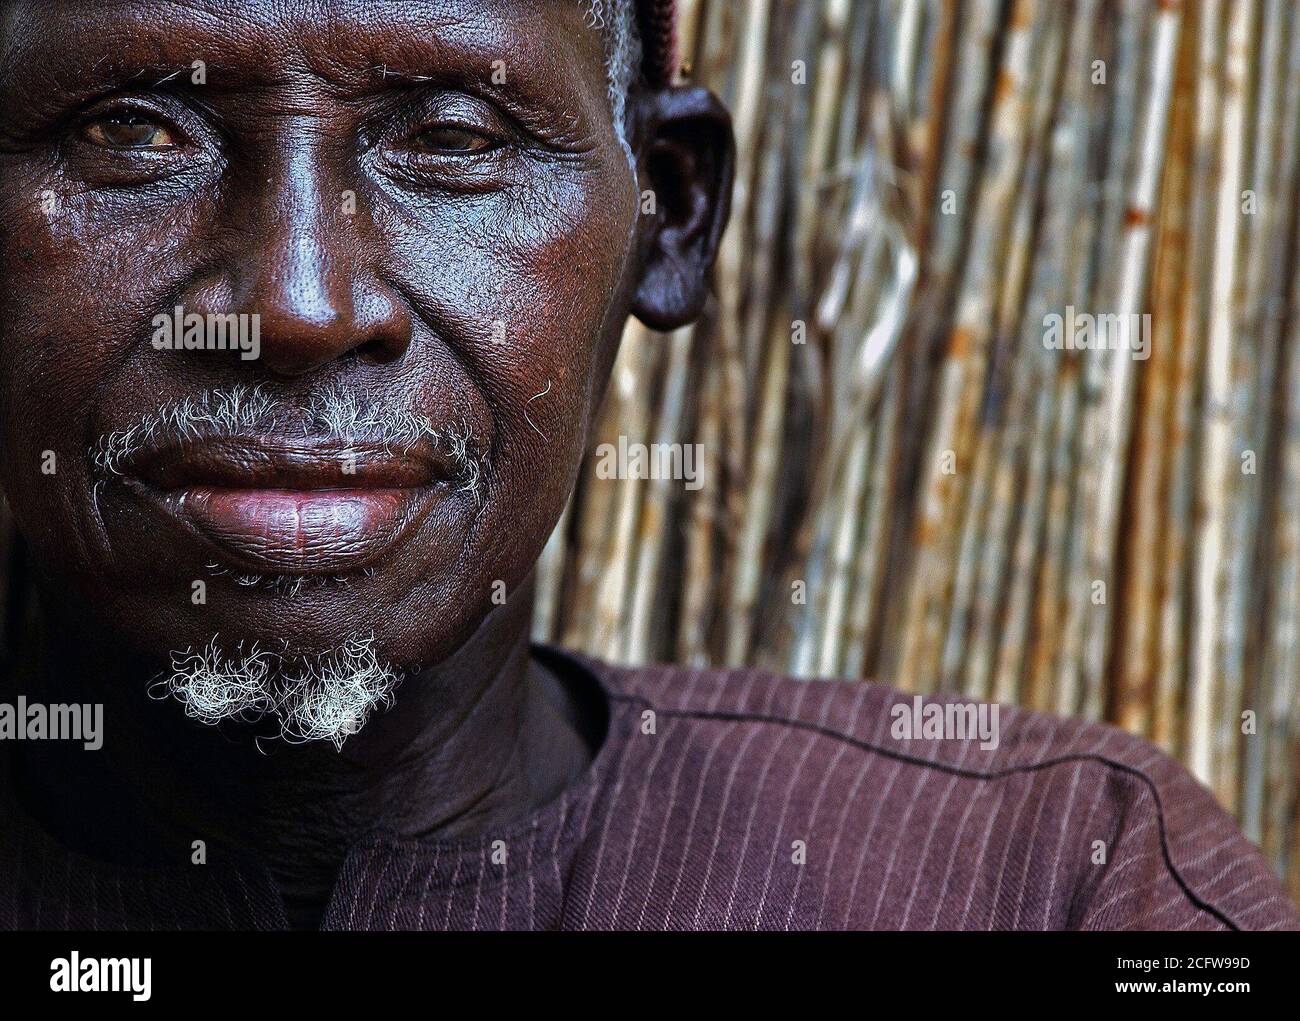 2003 - A local man from a small village located on the outskirts of Dakar, Senegal. Photograph taken in support of Joint Task Force Liberia Stock Photo